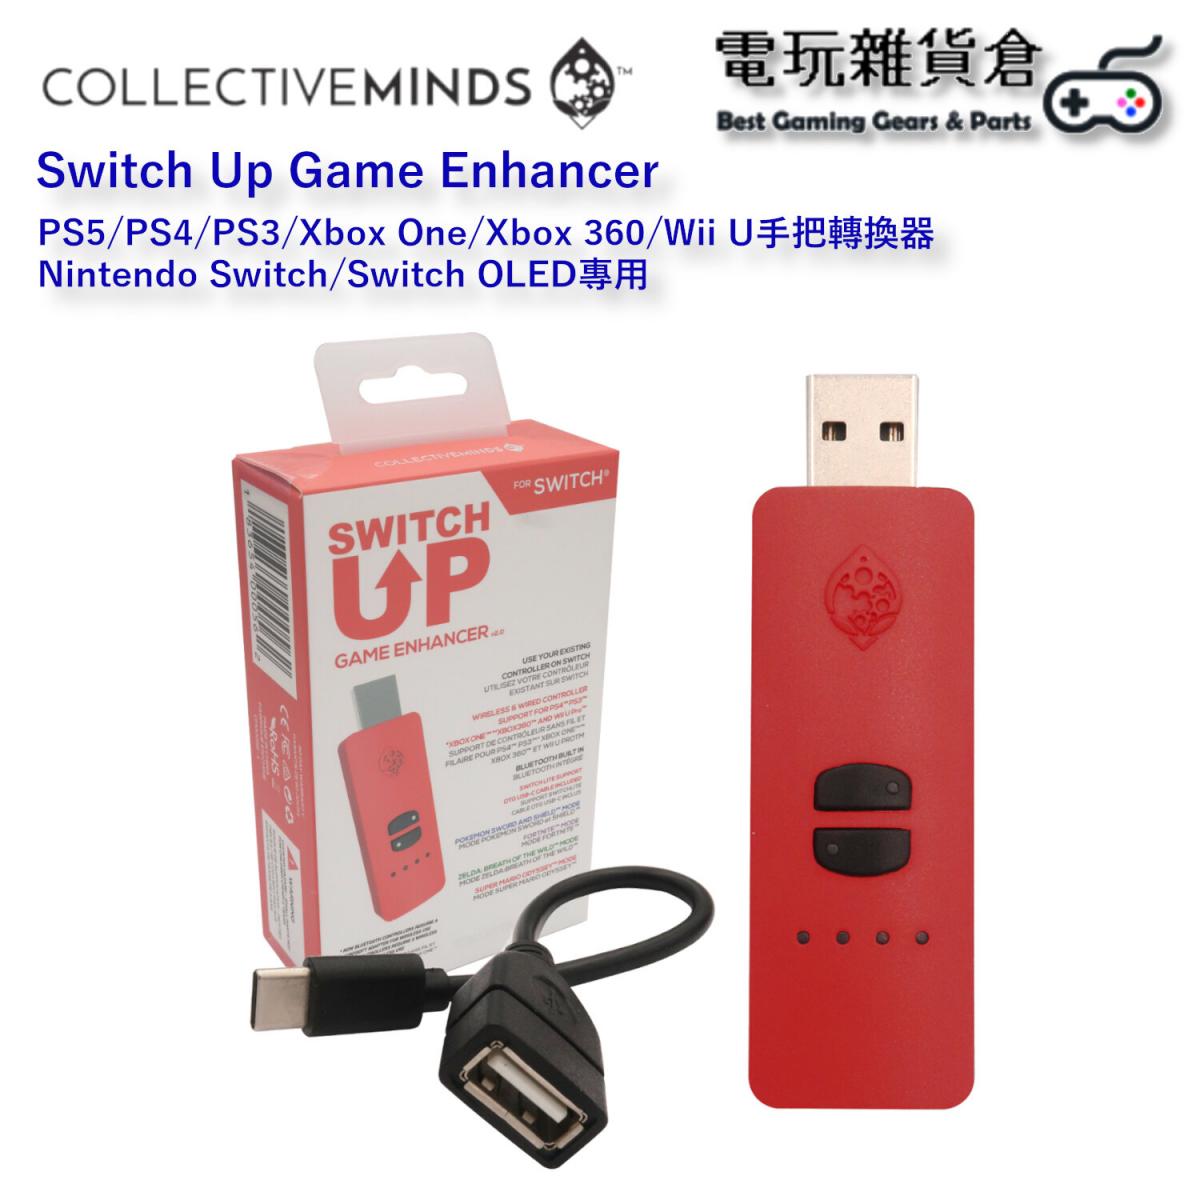 Doncella Ceder el paso Botánico Collective Minds | Switch Up Game Enhancer Adapter for Nintendo Switch/ Switch OLED | HKTVmall The Largest HK Shopping Platform